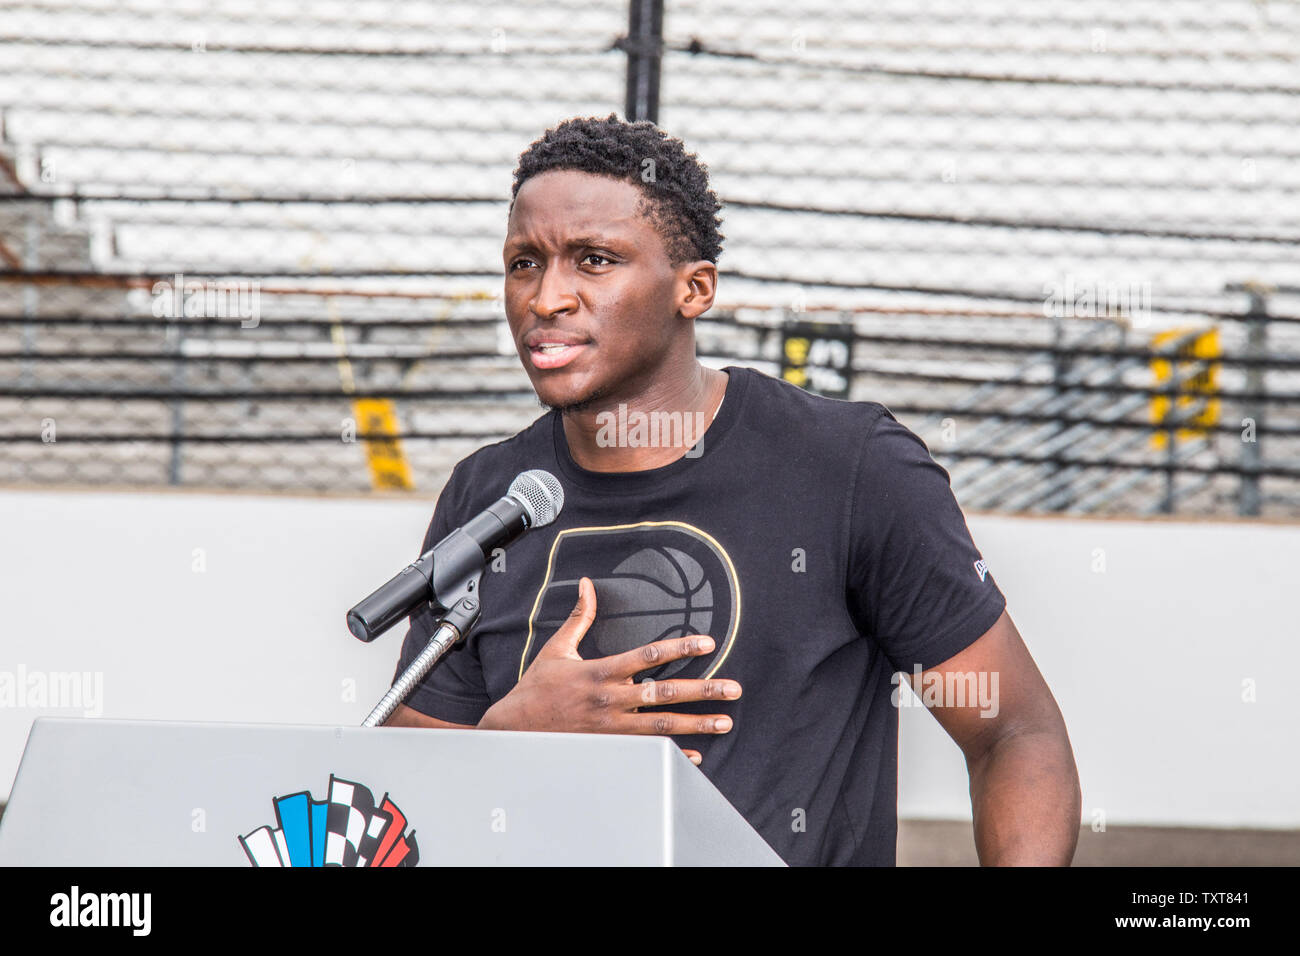 Indiana Pacers Guard Victor Oladipo speaks to the drivewrs and crowd gathered at the Drivers Meeting for the 2018 Indianapolis 500  at the Indianapolis Motor Speedway on May 26, 2018 in Indianapolis, Indiana. Photo by Edwin Locke/UPI Stock Photo